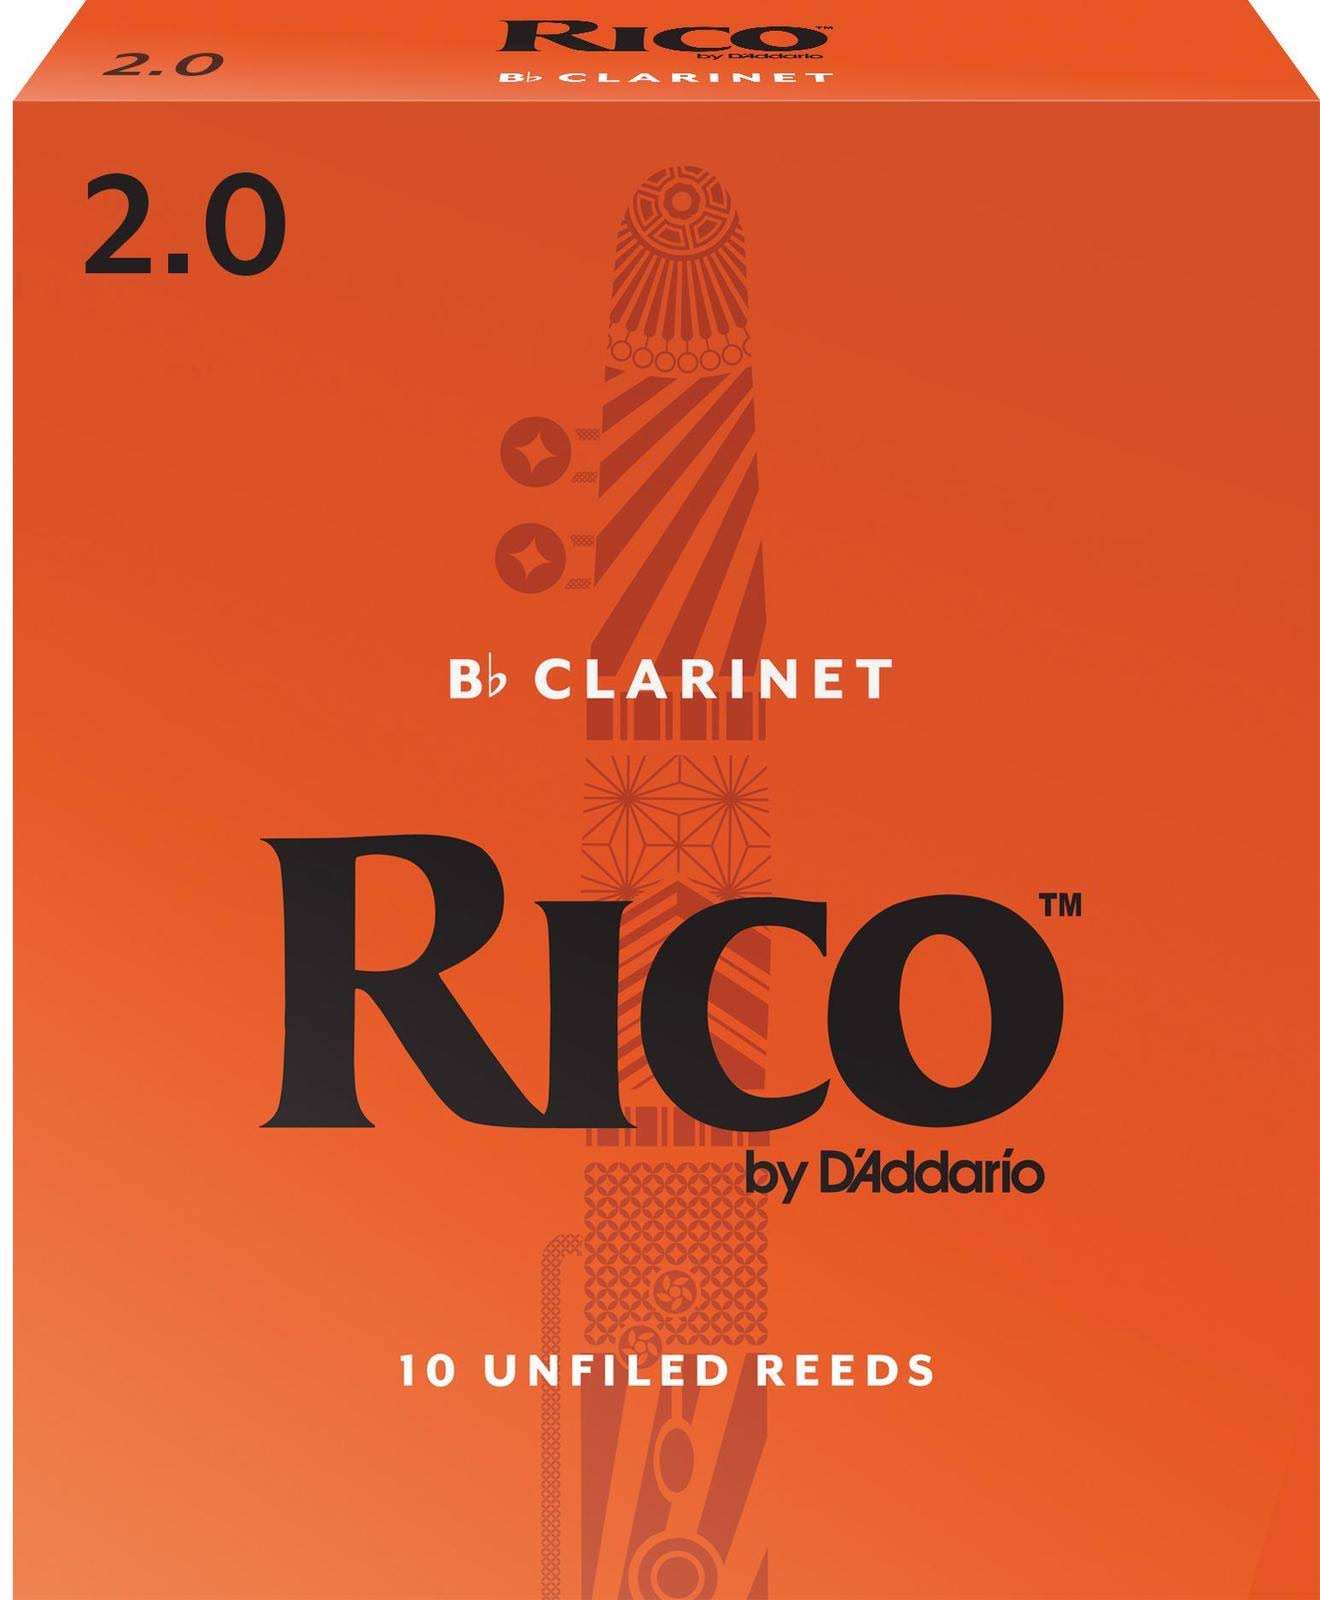 Rico by D'Addario Bb Clarinet Reeds - Strength 2.0, 10 Unfiled Reeds